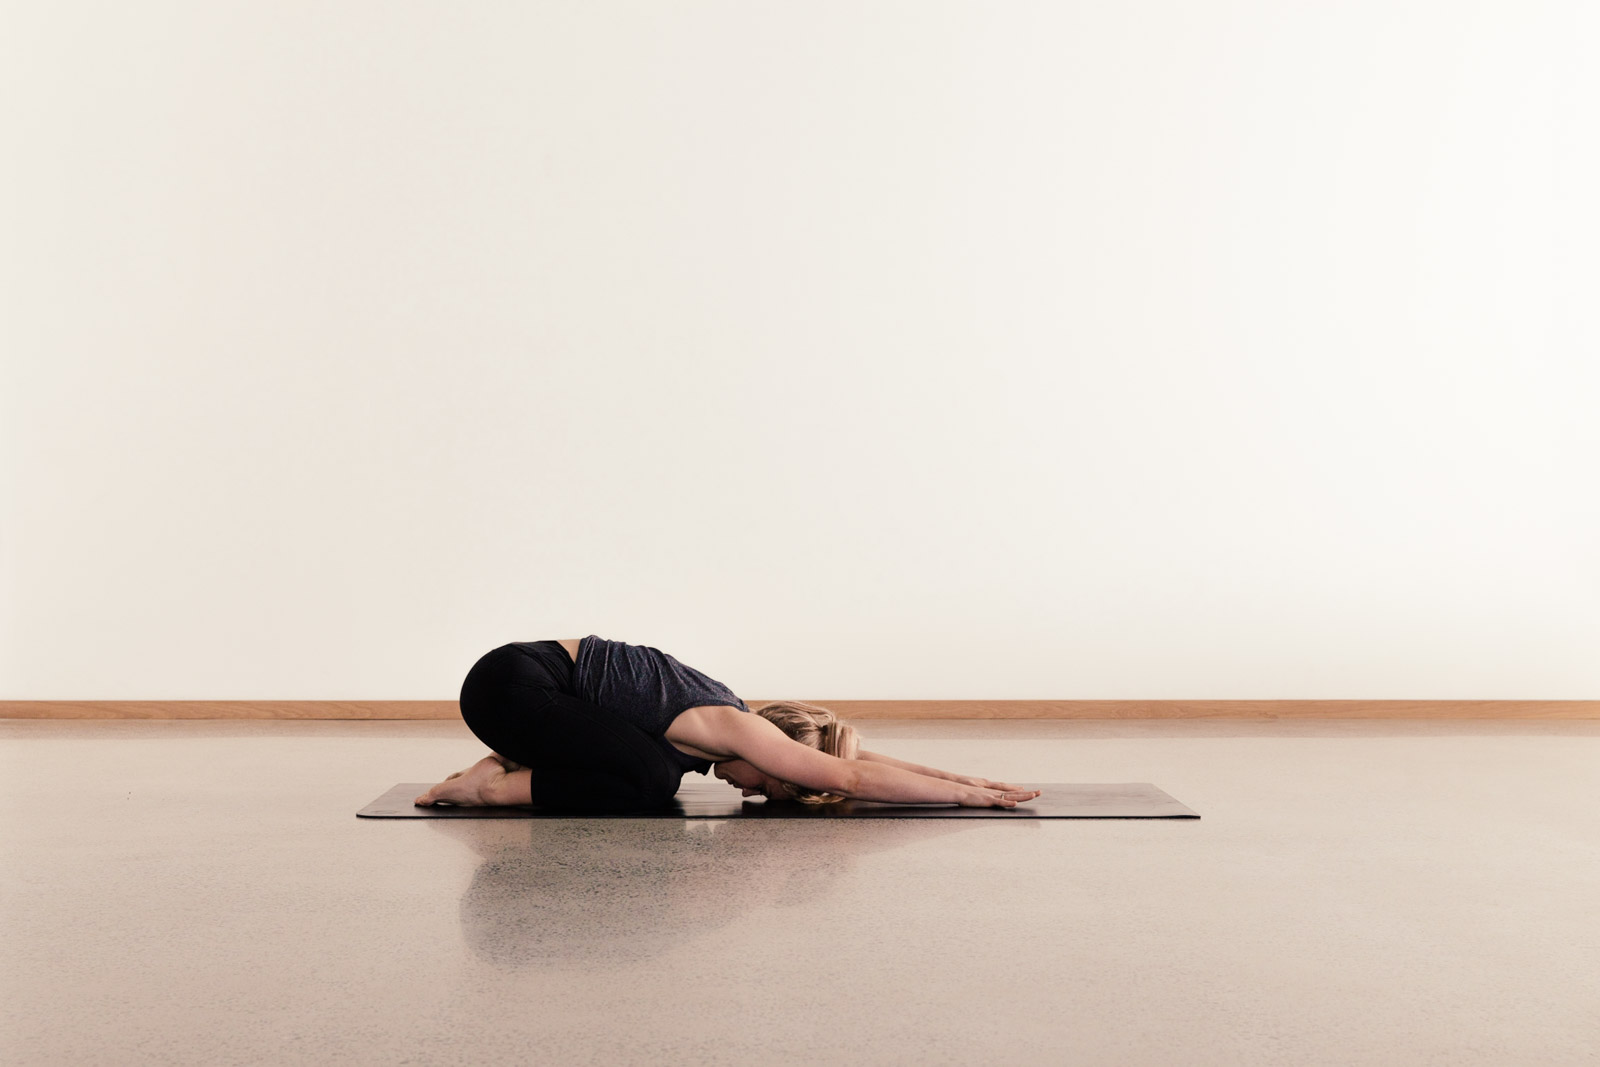 What are the benefits of child's pose in yoga, and how long should one hold  this position for maximum benefit? - Quora